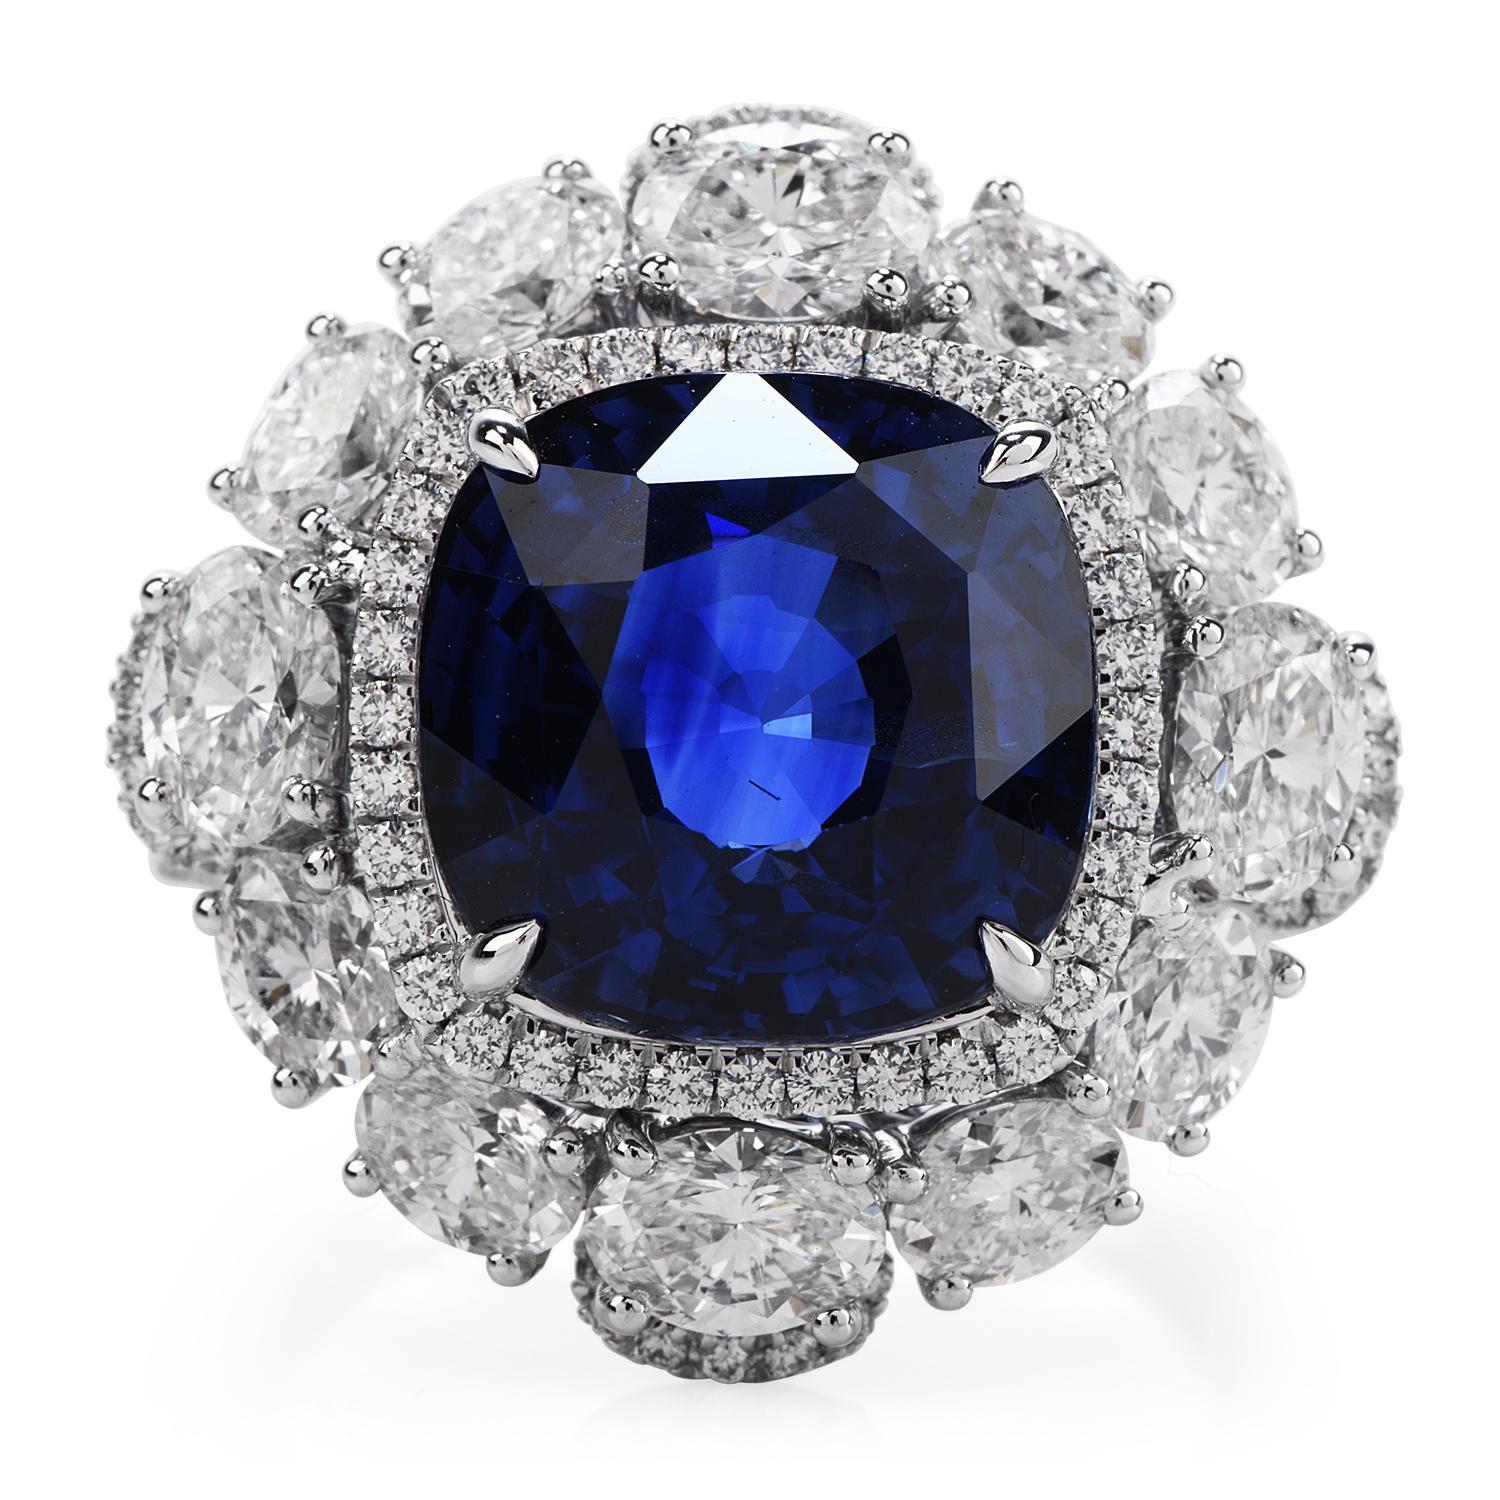 Deep  Royal Blue Sapphire & Diamond Large shinny Engagement Cocktail ring, 

Hand-Crafted in solid 18K white gold, the center is adorned by a GRS certified vivid Sri Lankan Blue Ceylon Sapphire, cushion shaped, prong cut, weighing a total of 11.17